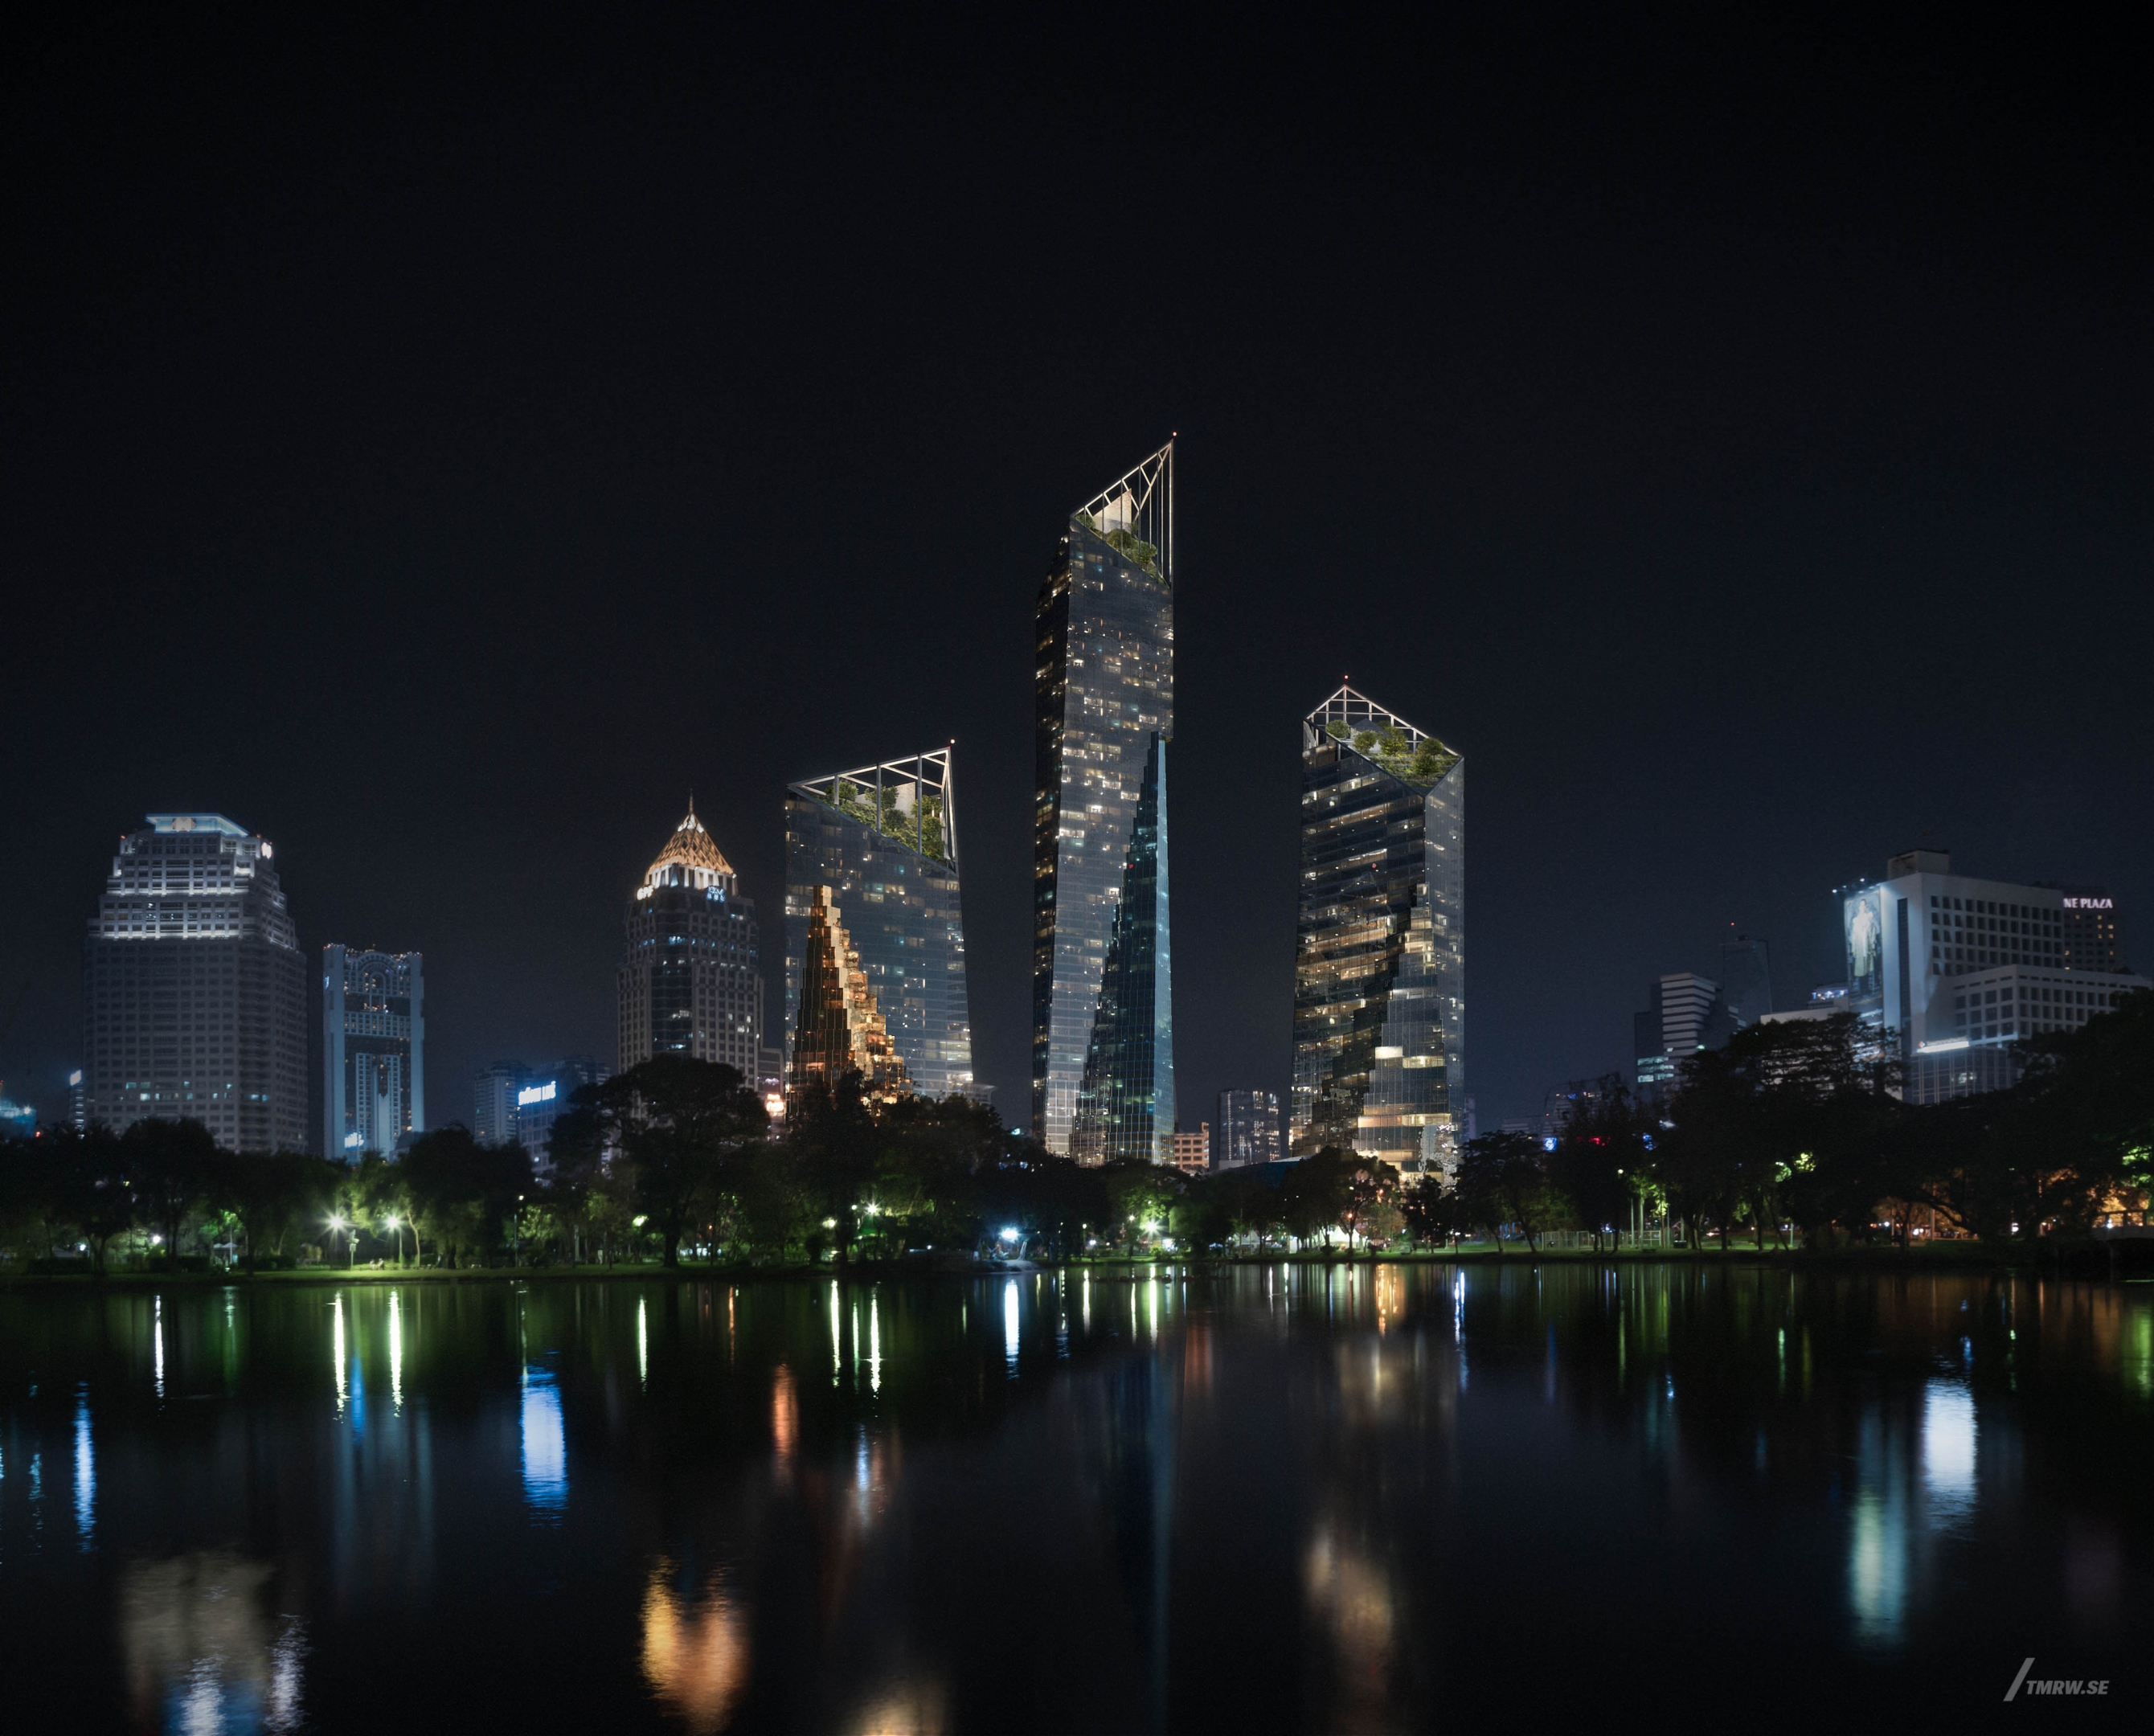 Architectural visualization of Dusit Thani Hotel for Libeskind, exterior of a hotel at night, water in foreground